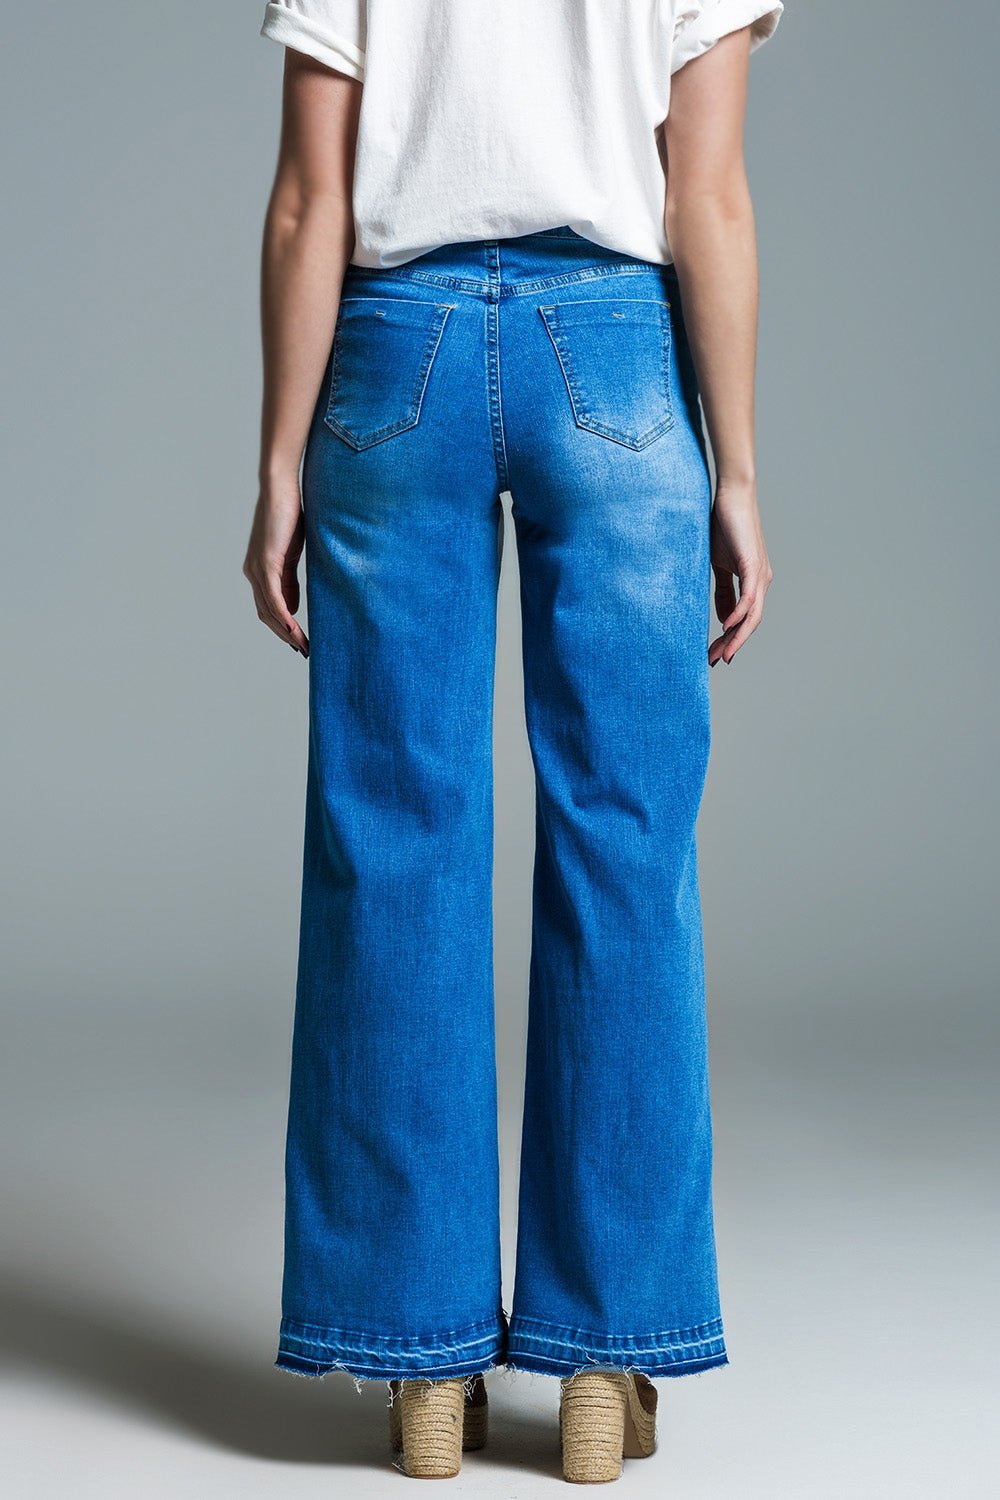 Palazzo Style Jeans in Mid Wash With Double Stitching Detail at the Hem - Mack & Harvie